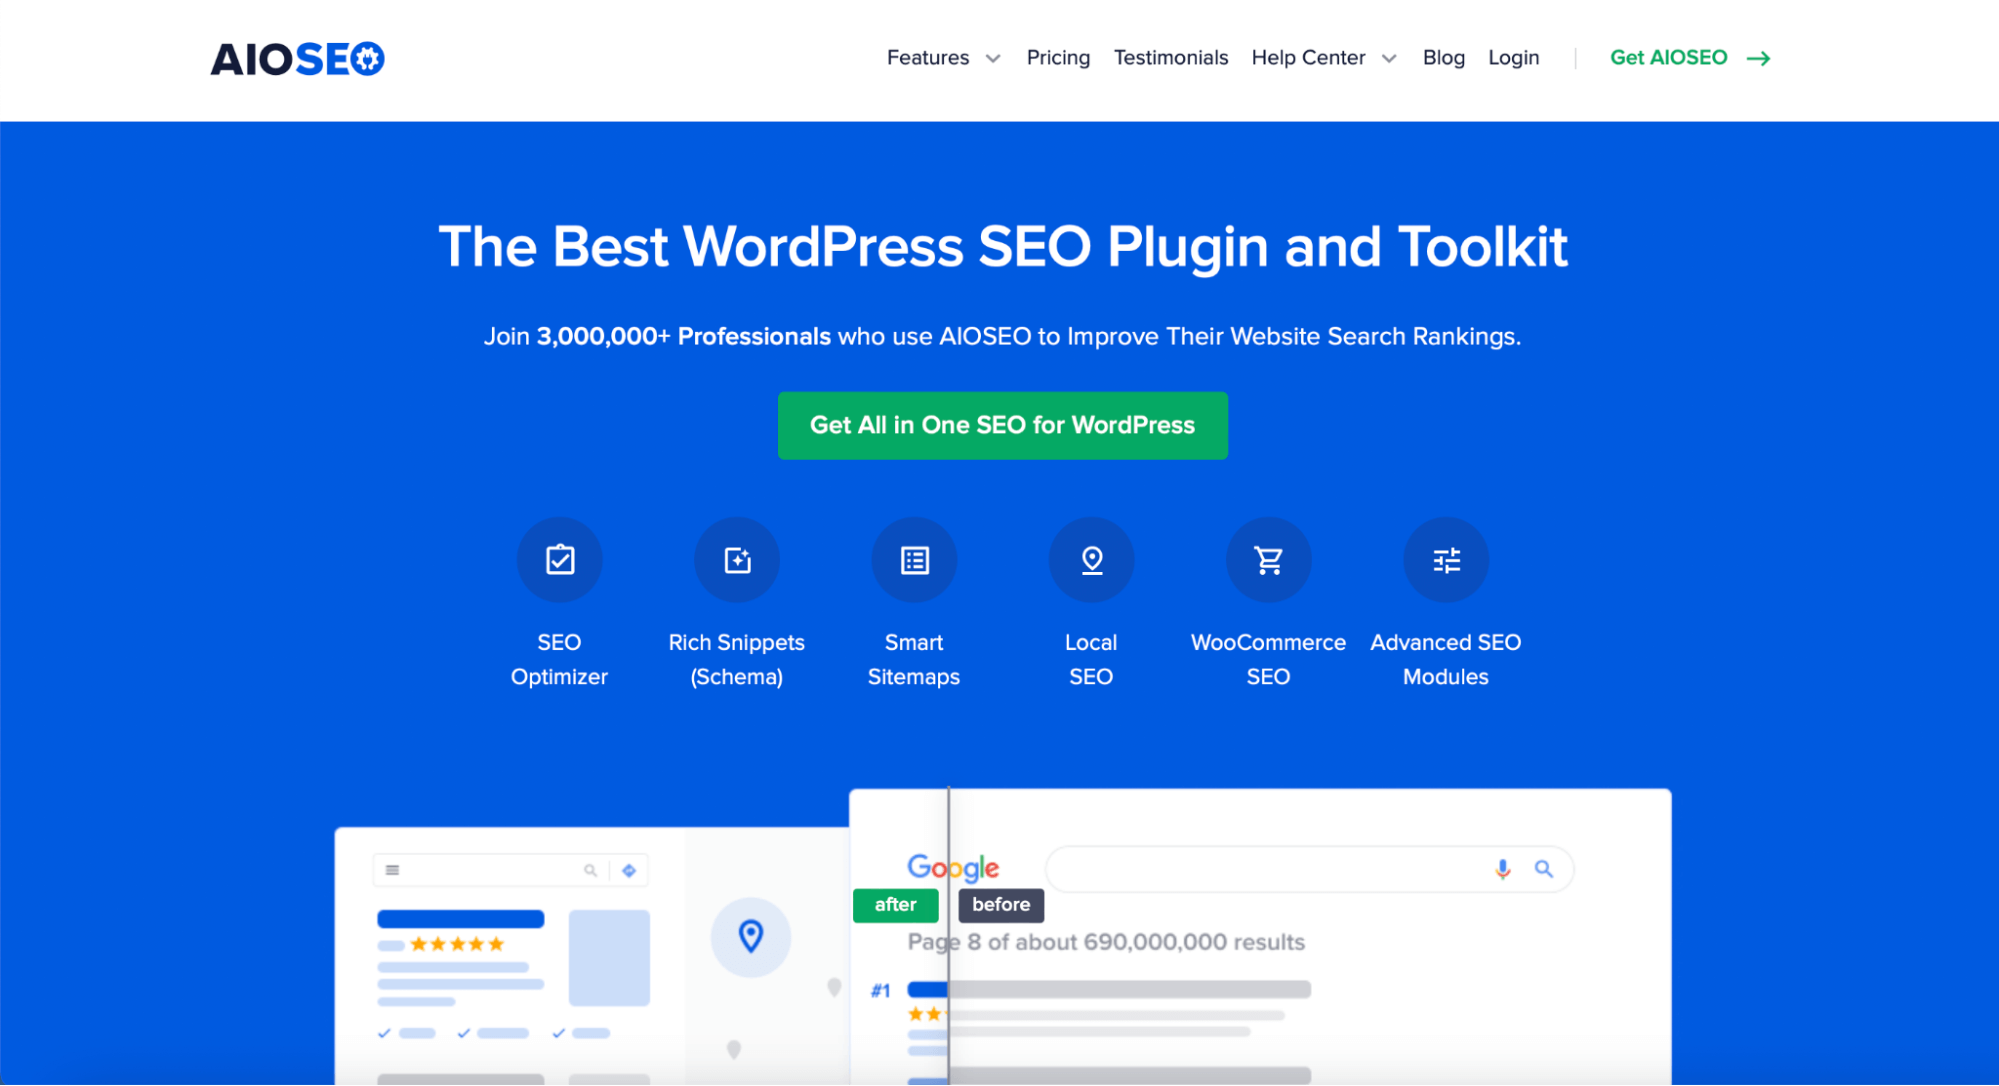 All in One SEO Pack homepage